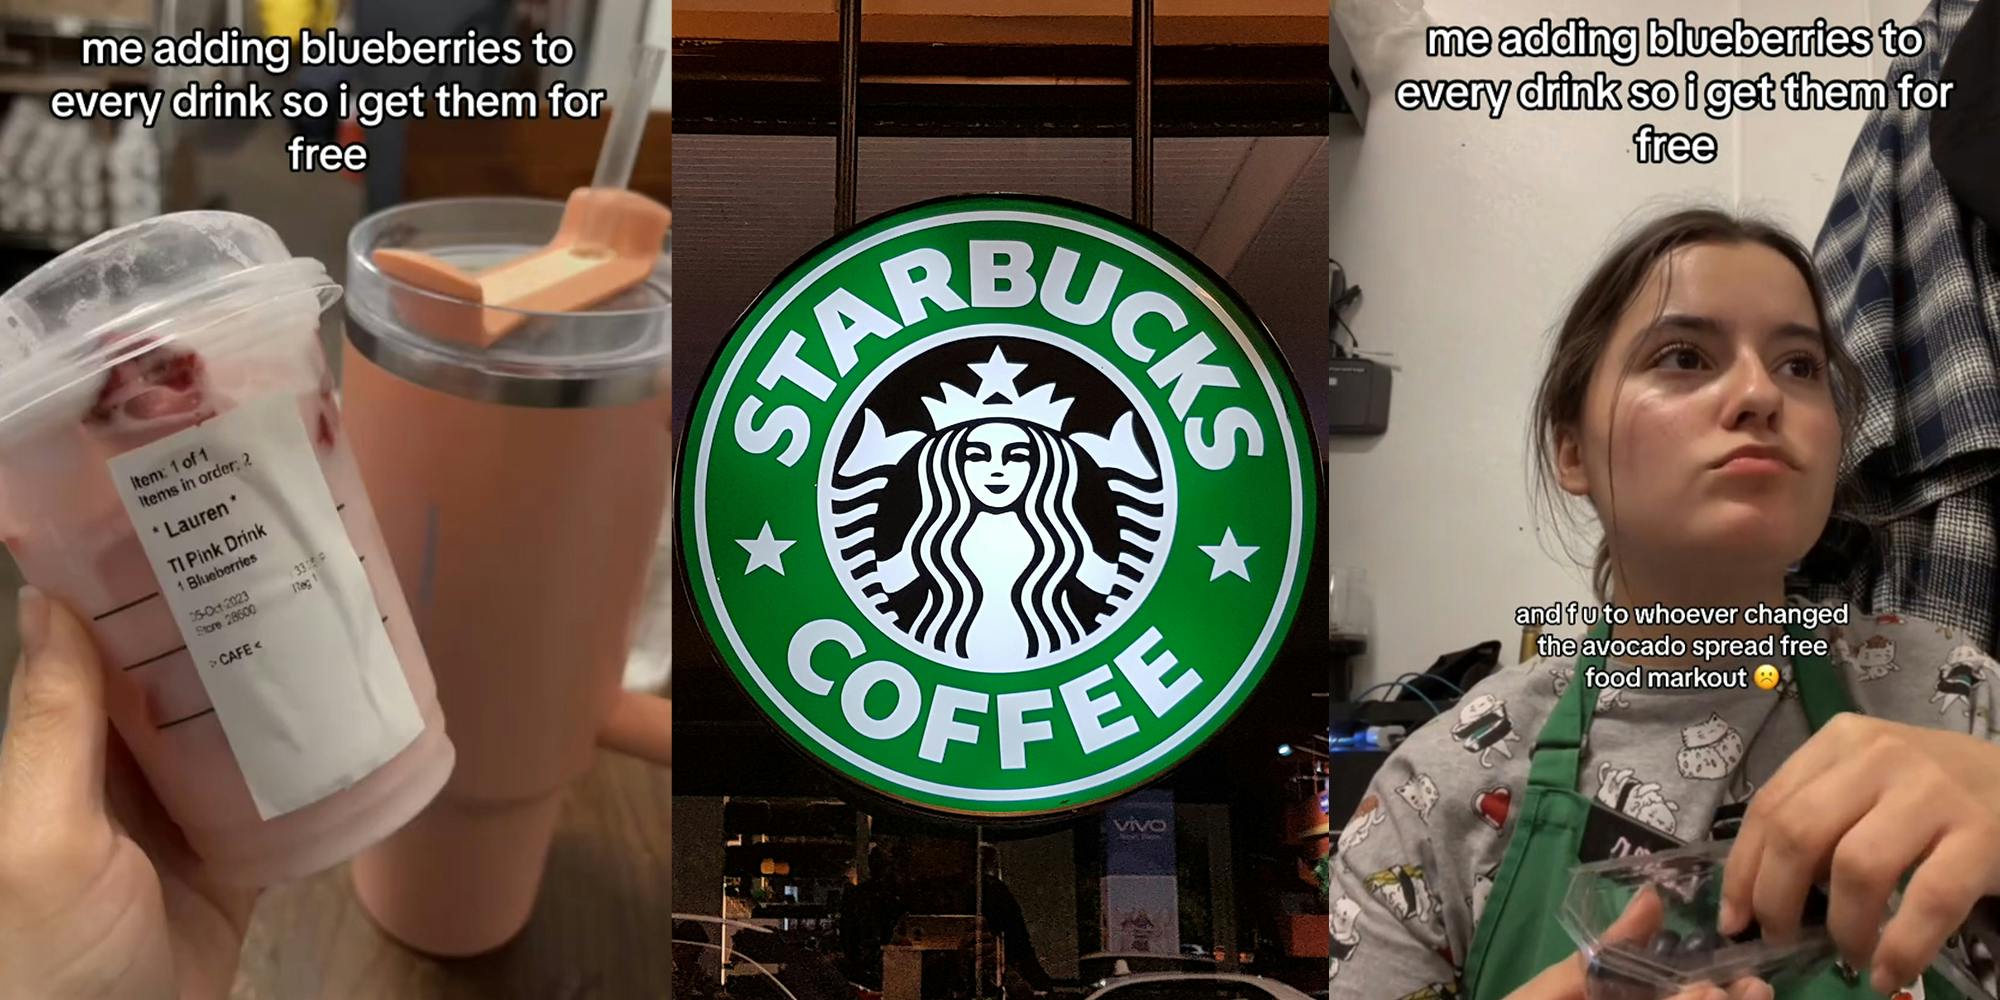 Starbucks barista adds blueberries to customers' orders so she can have them for free